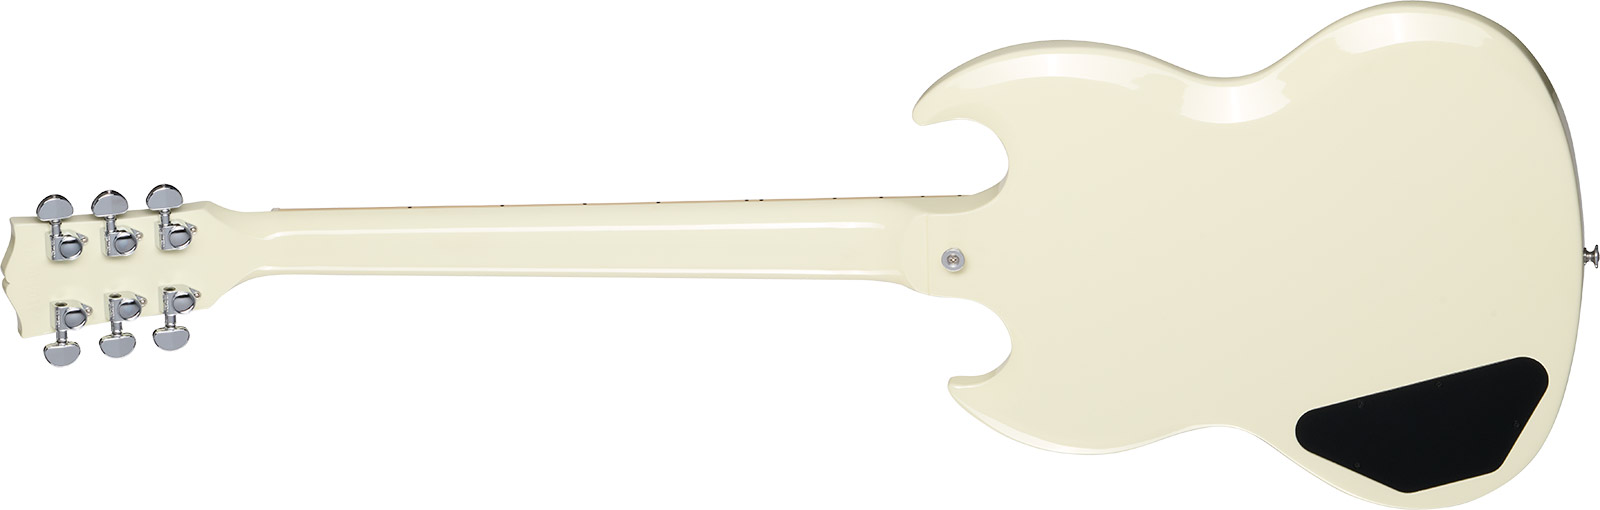 Gibson Sg Standard Custom Color 2h Ht Rw - Classic White - Double cut electric guitar - Variation 1